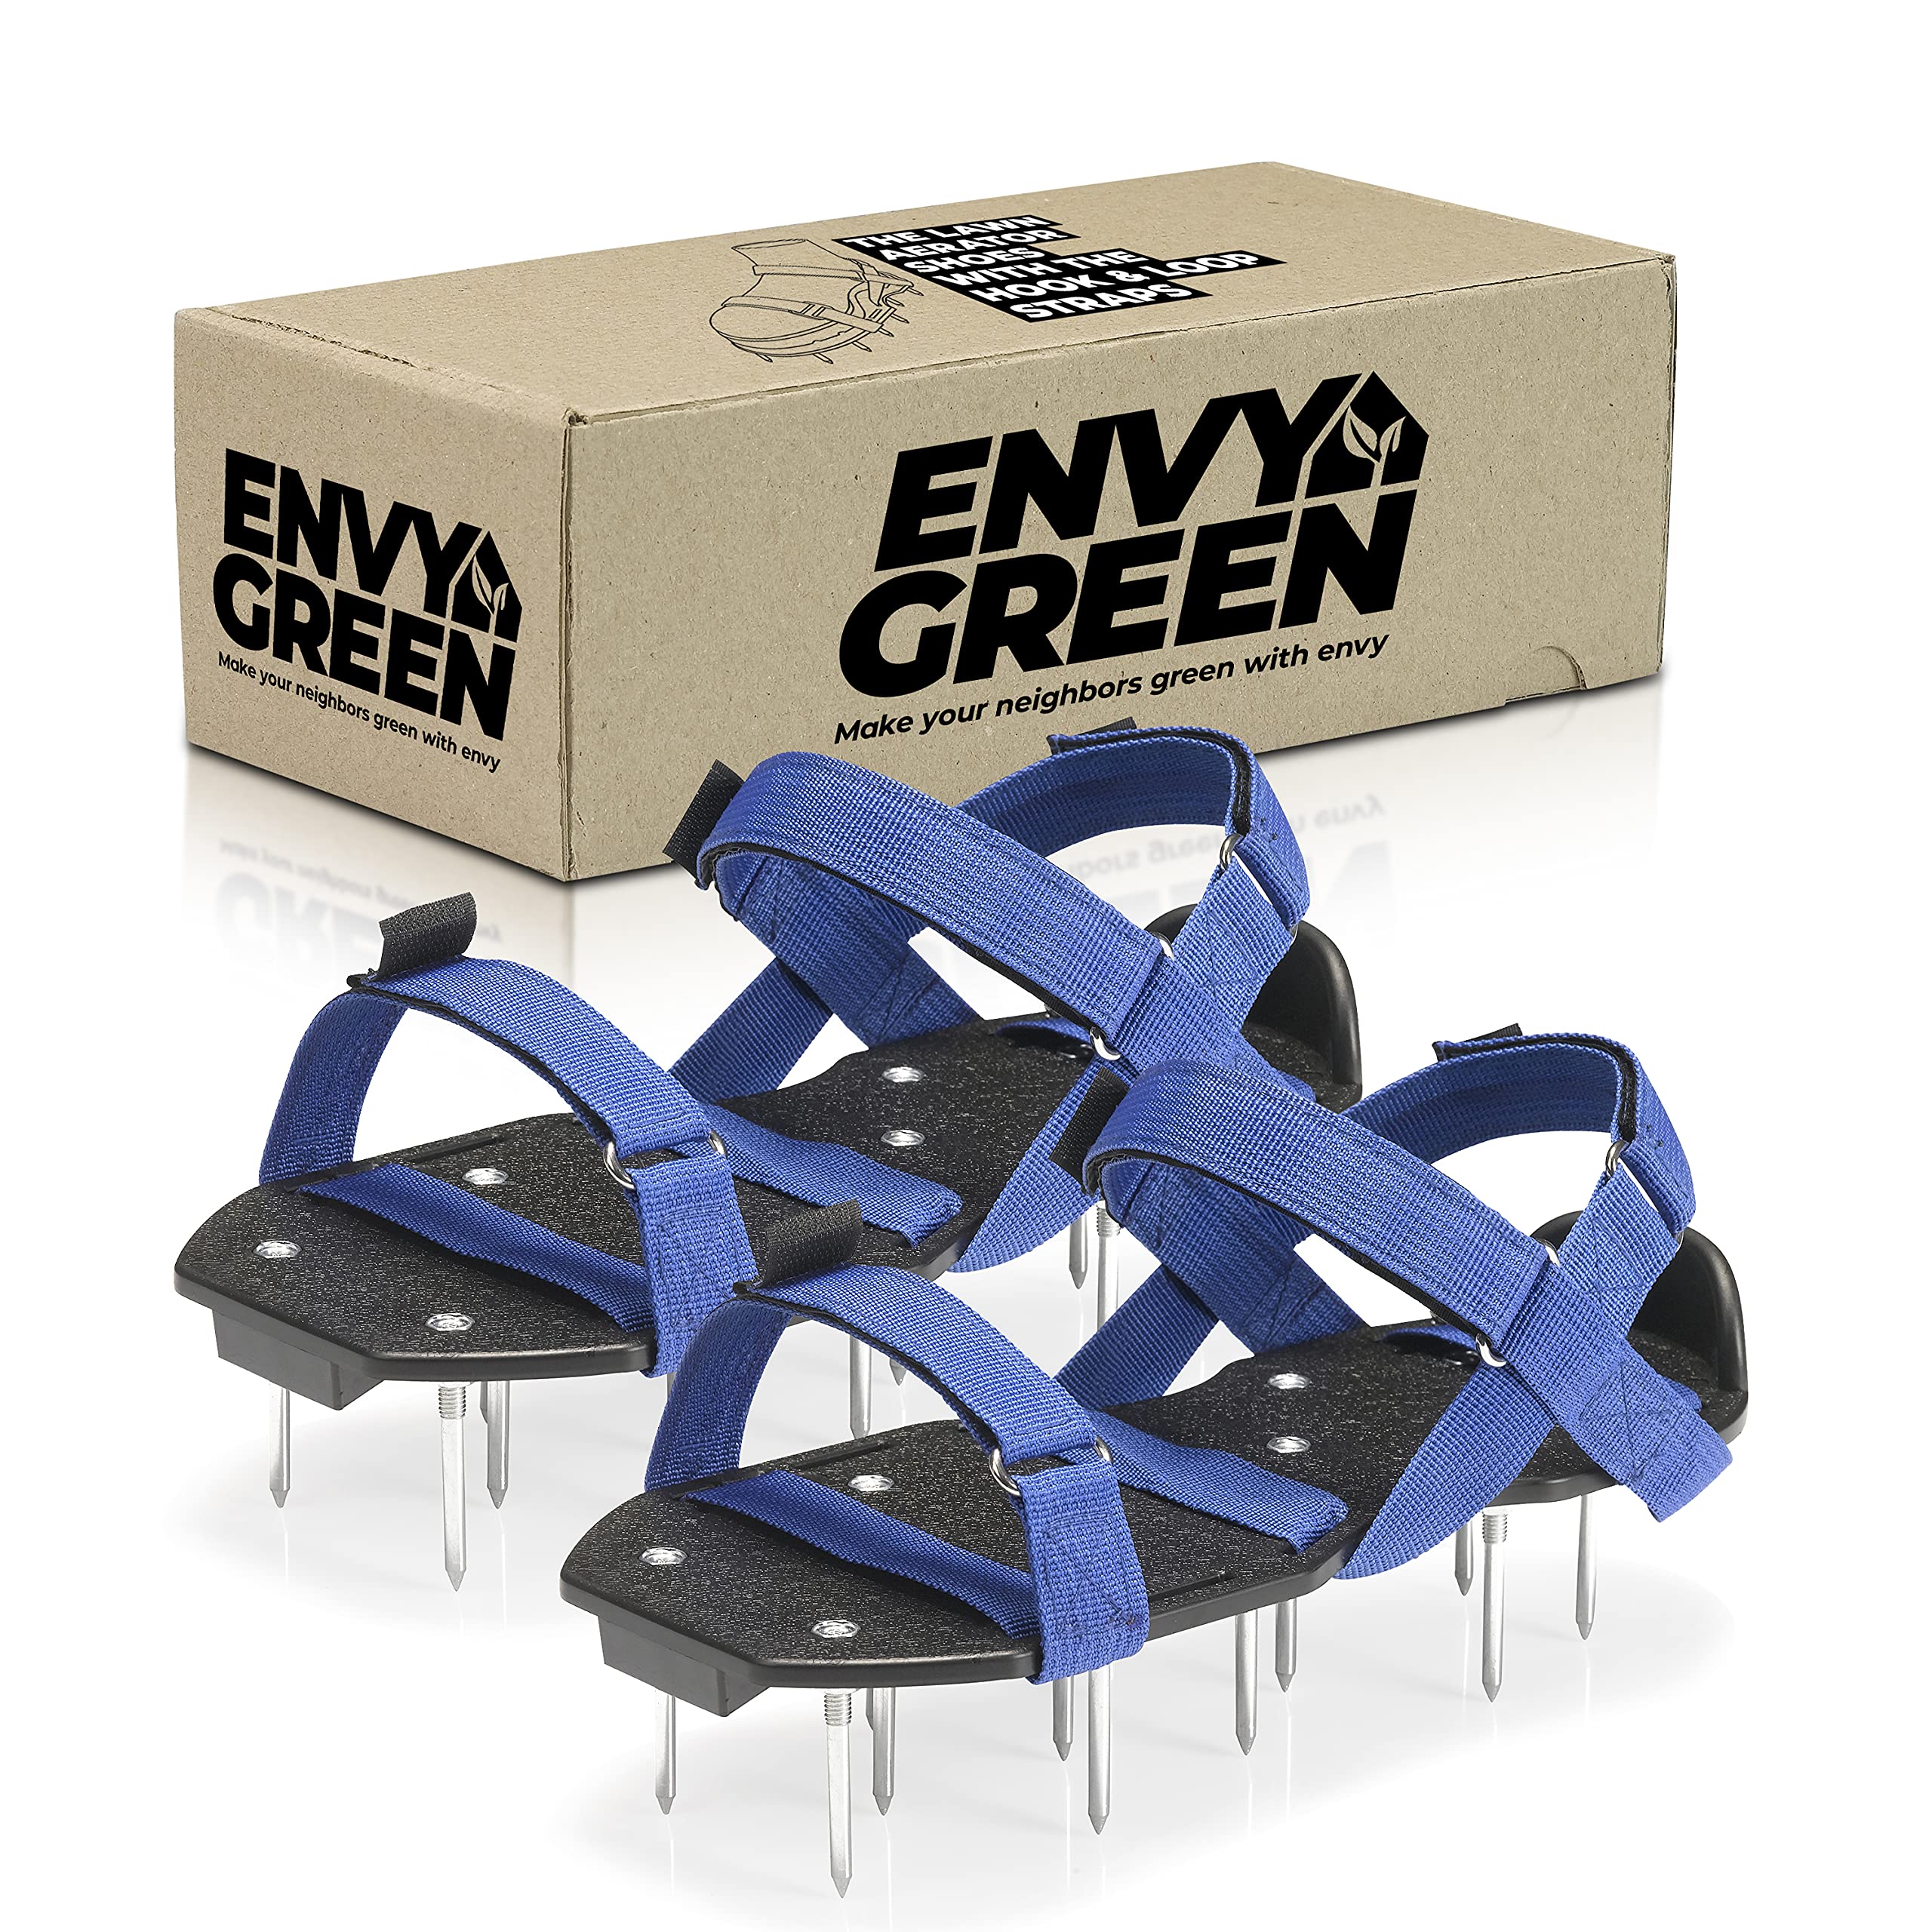 Envy Green Lawn Aerator Shoes – Ready-to-Use, Pre-Assembled – One-Size-Fits-All Gardening Shoes – Lawn Aerator with X-Strap – Lawn Aerator Spike Shoes for Lawn and Yard – Premium Tools by EnvyGreen